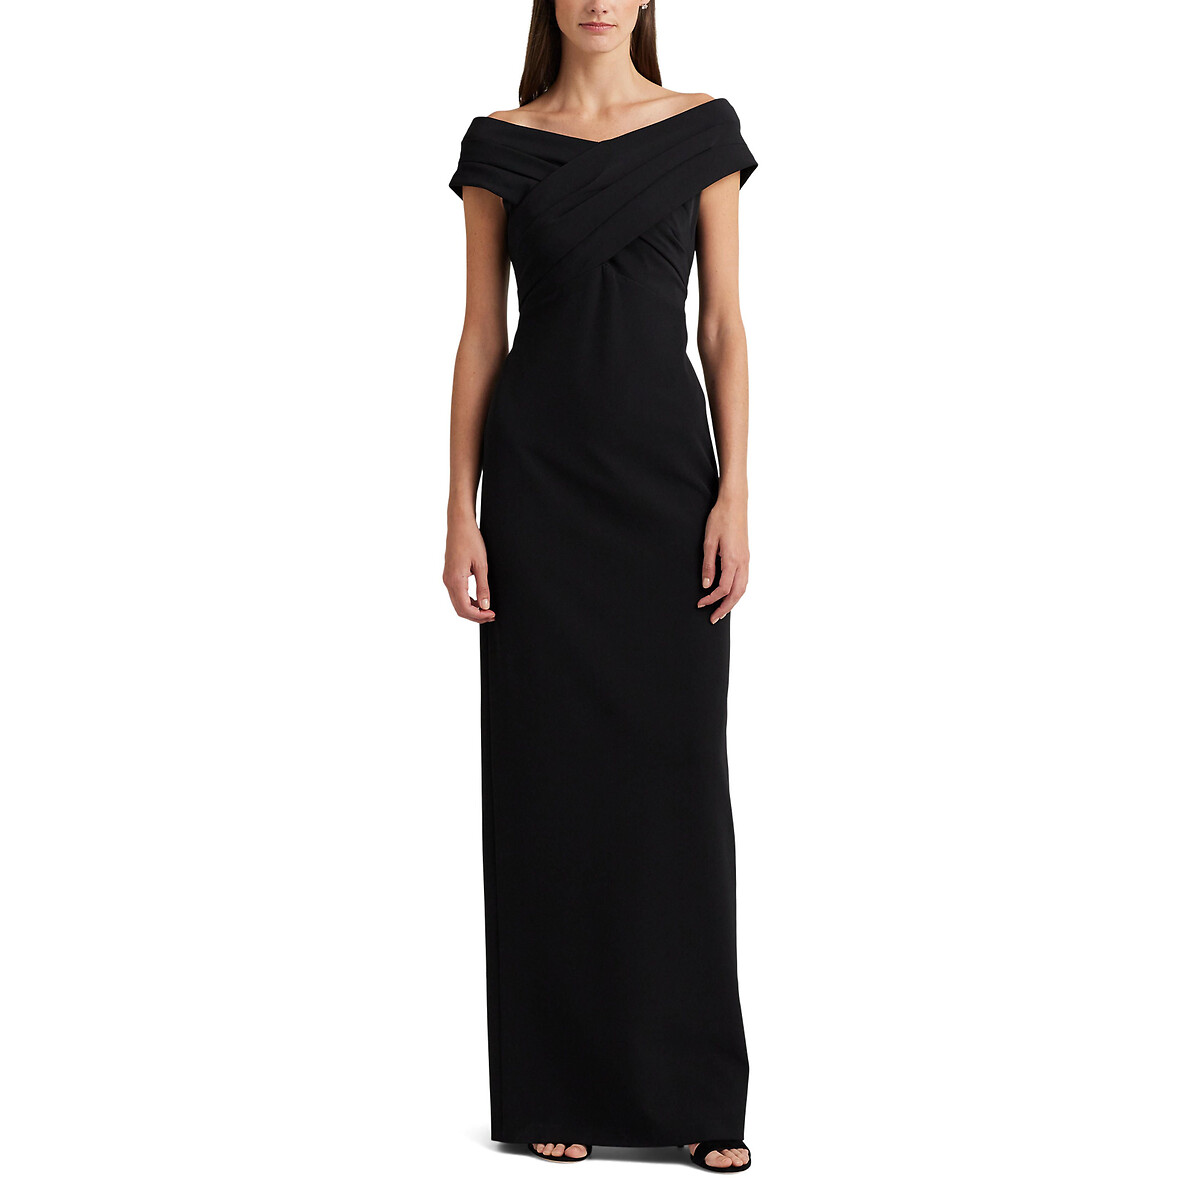 Irene recycled maxi dress with short sleeves, black, Lauren Ralph ...